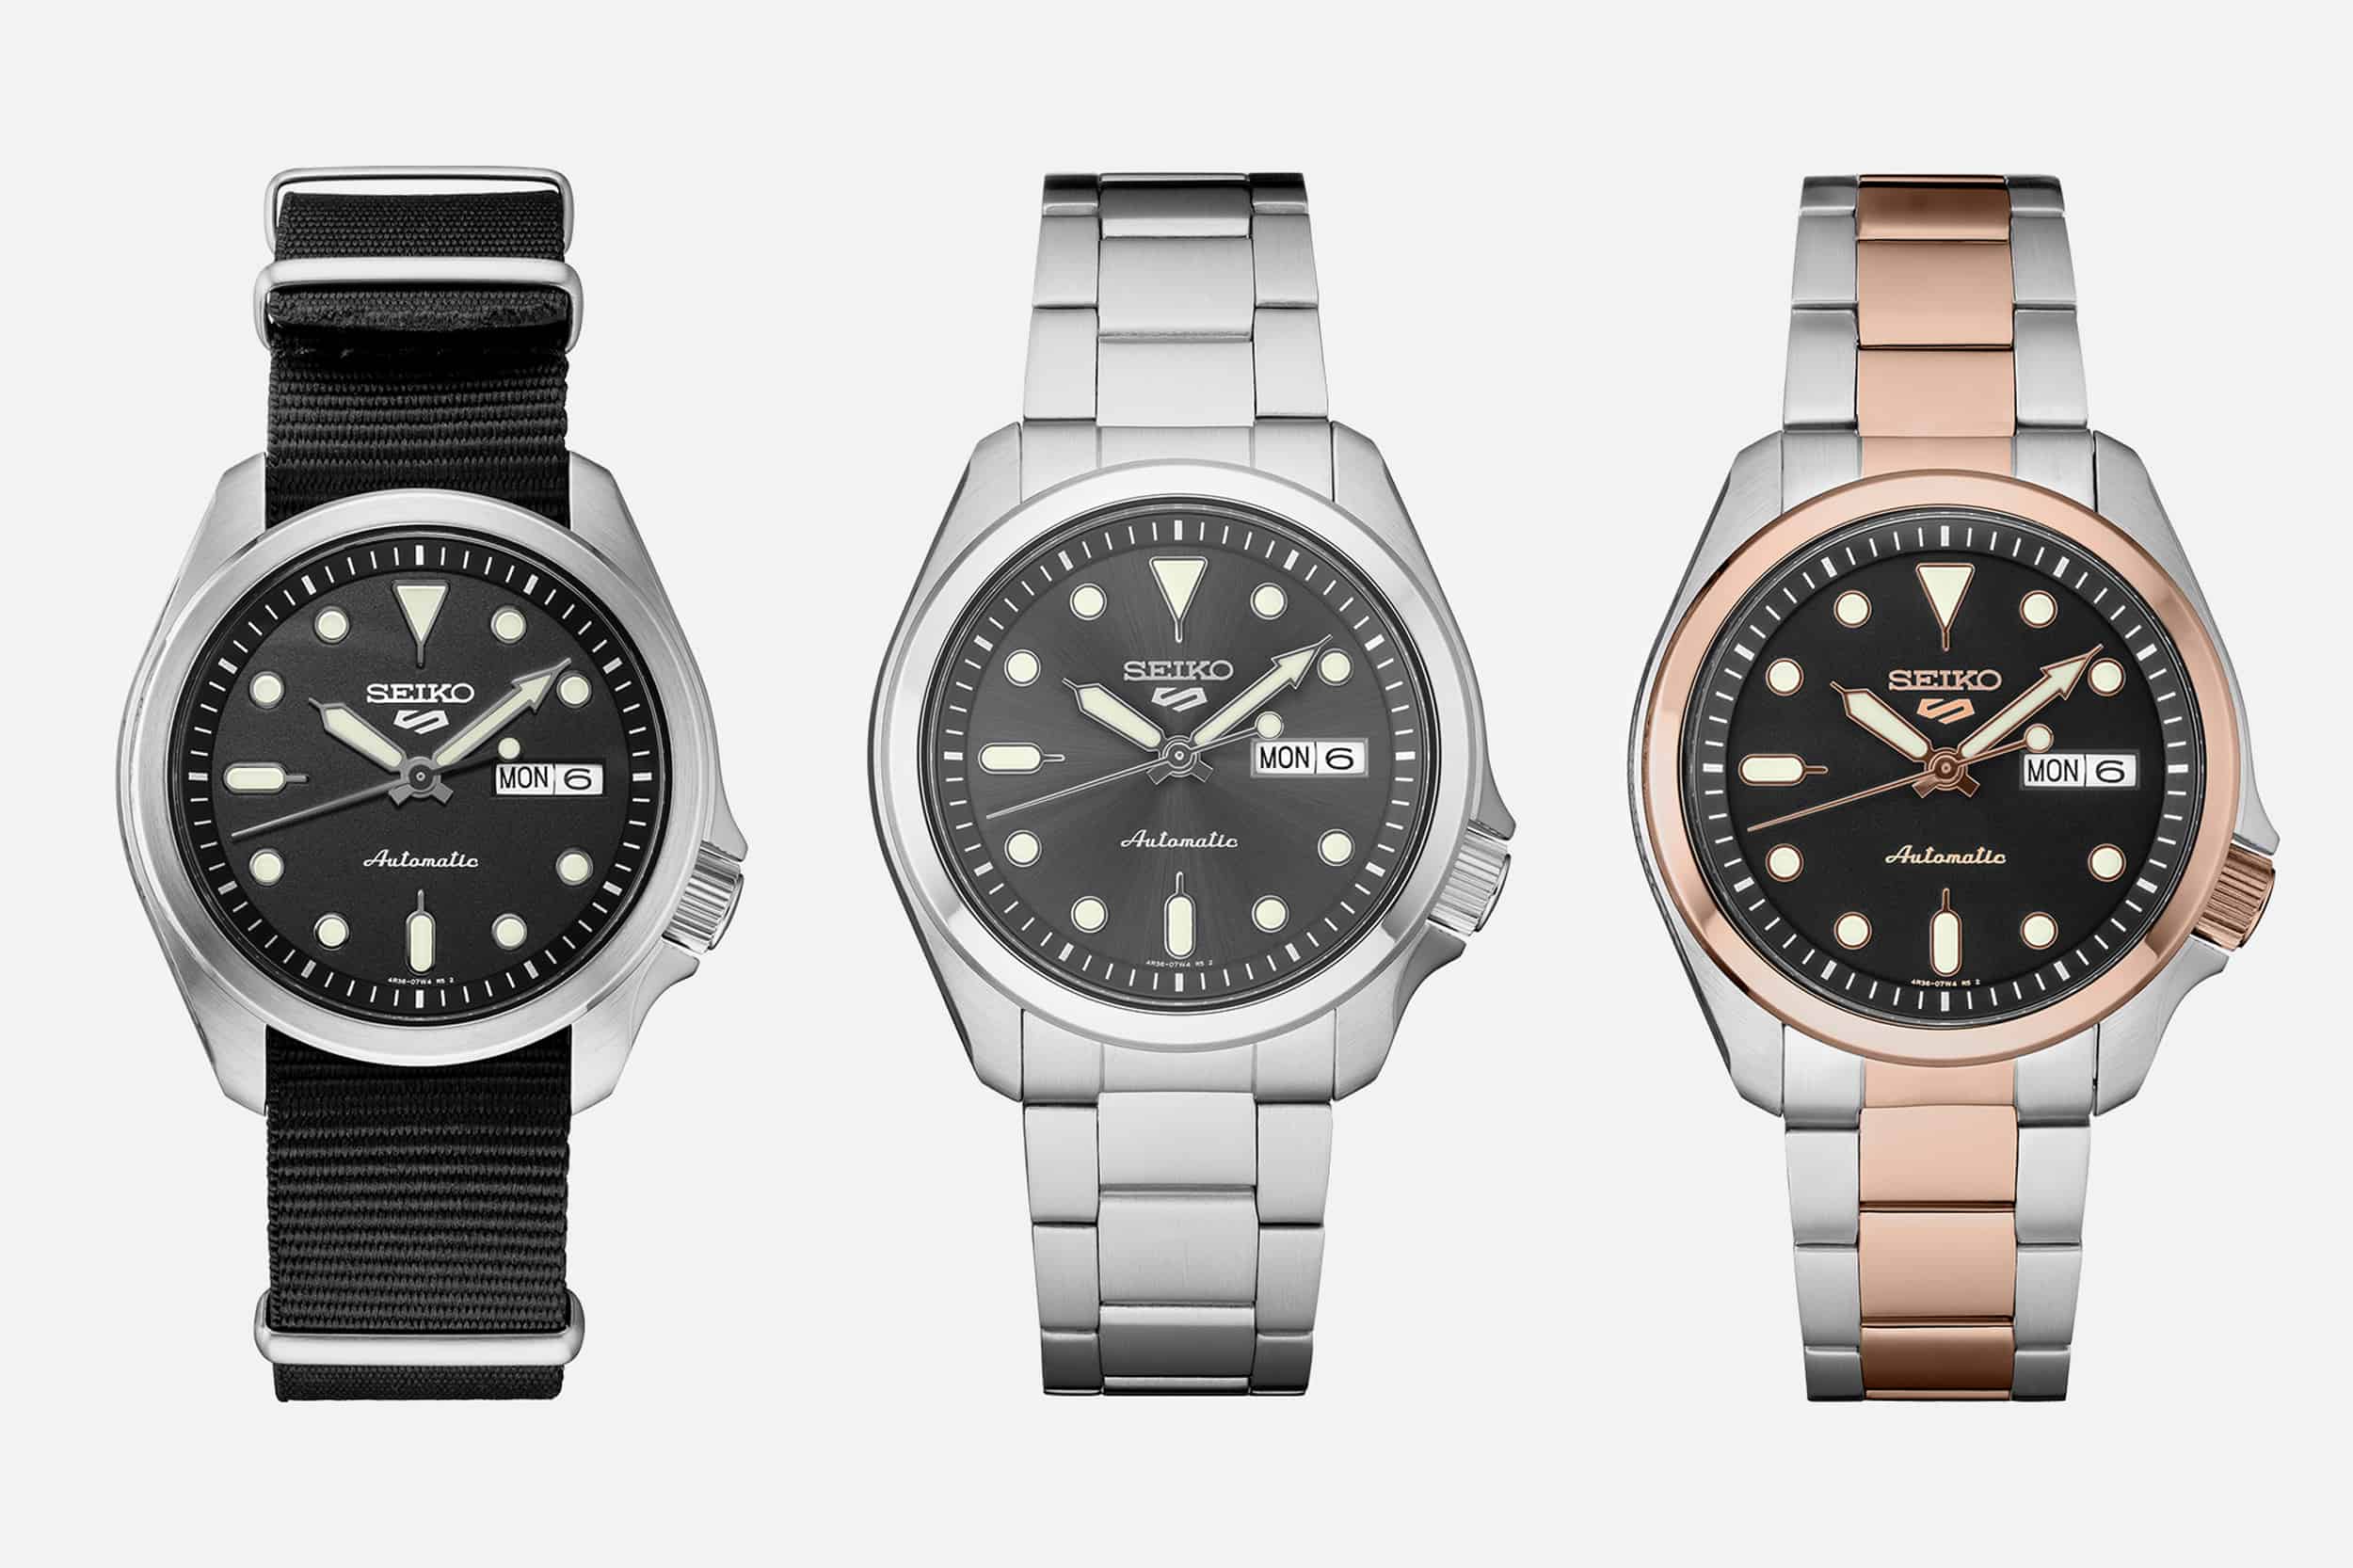 New Watches in the Seiko 5 Sports Collection Lose the Dive with Their Latest - Worn & Wound